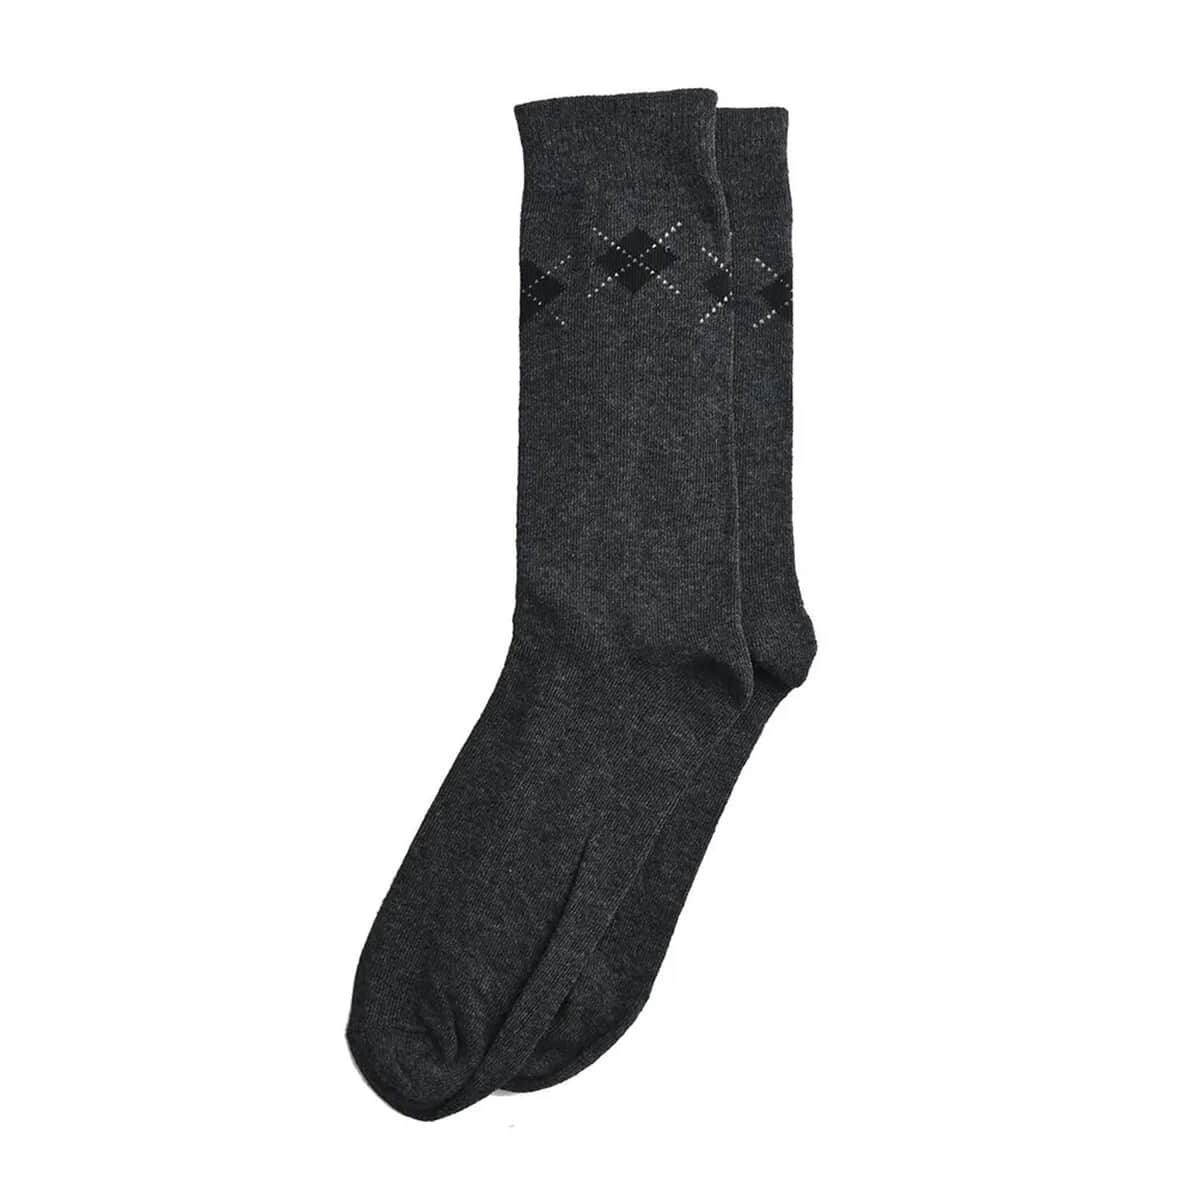 Marco Cavelli Black and Gray Set of 3 Men's Dress Socks, Breathable and Soft Socks for Men, Polyester and Cotton Socks, image number 3